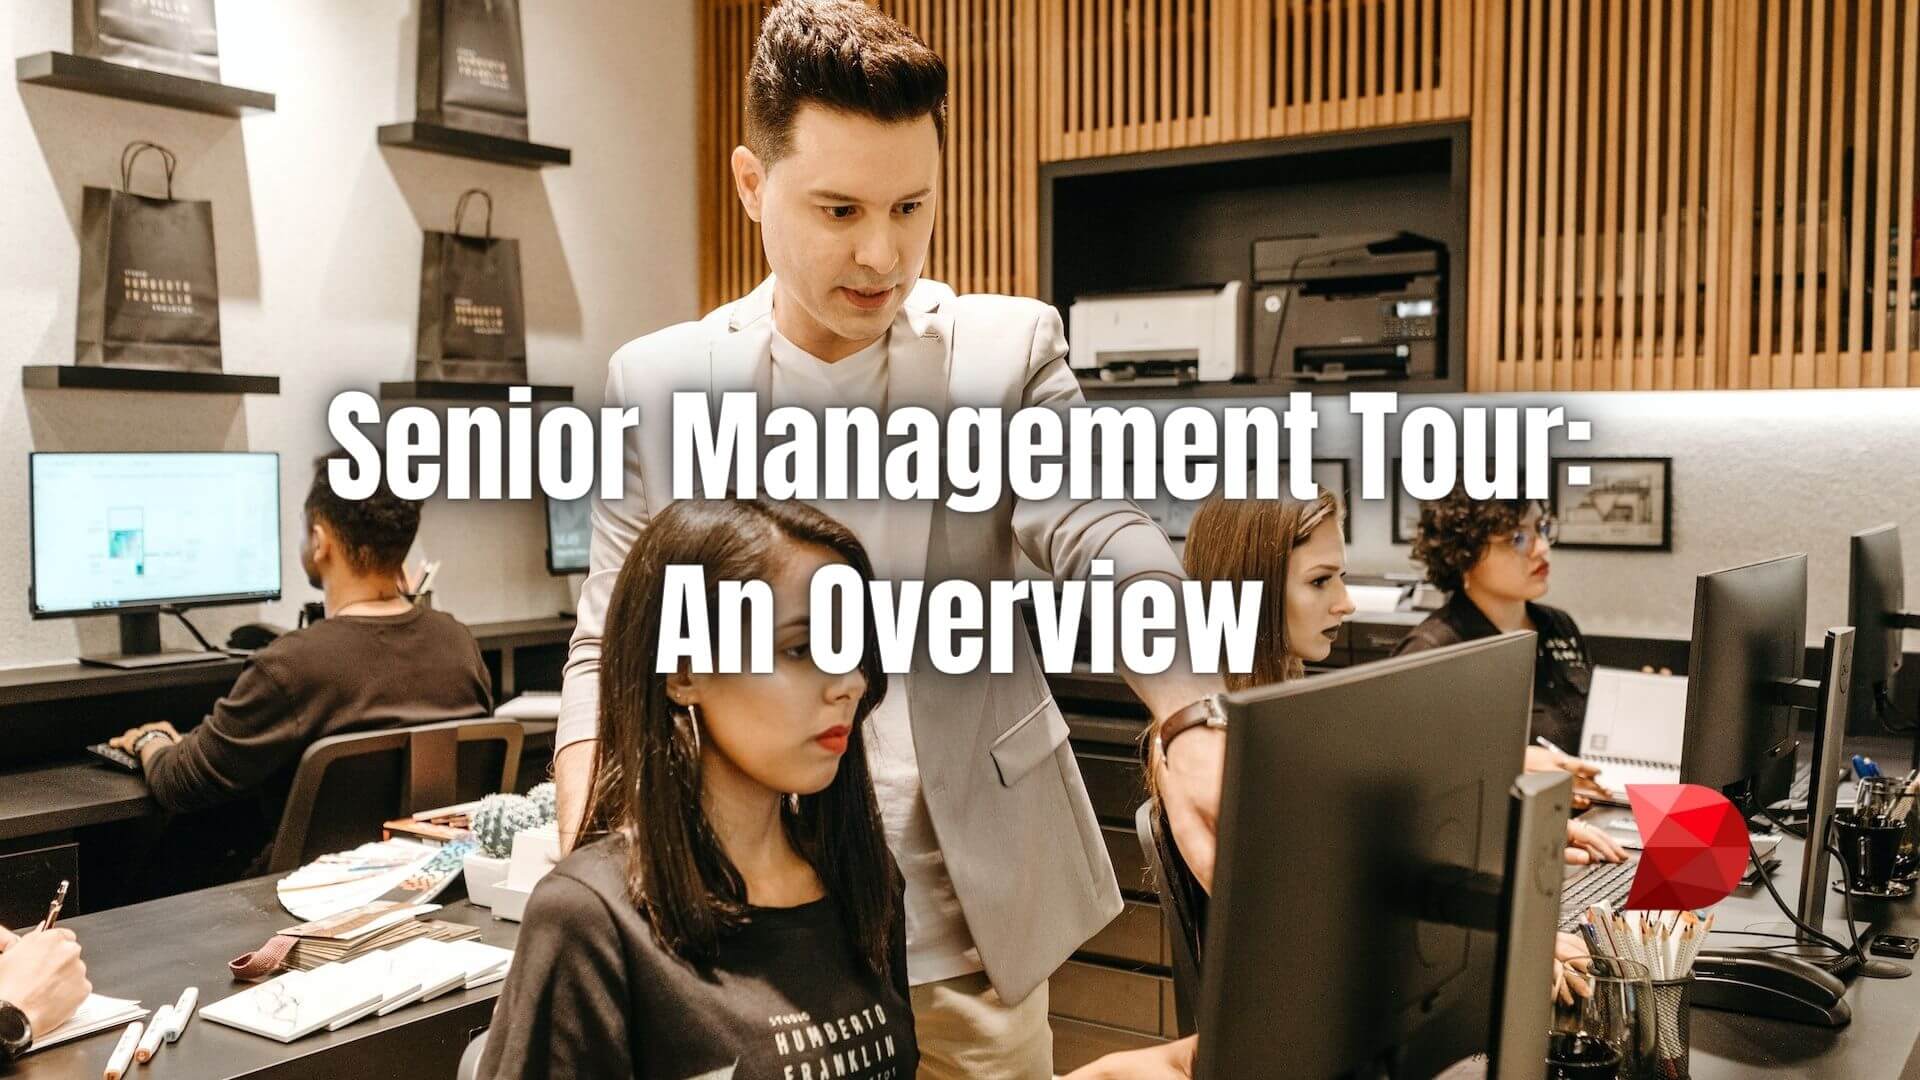 A senior management tour is essential to any organization's health and safety program. Here's how to conduct a successful tour.